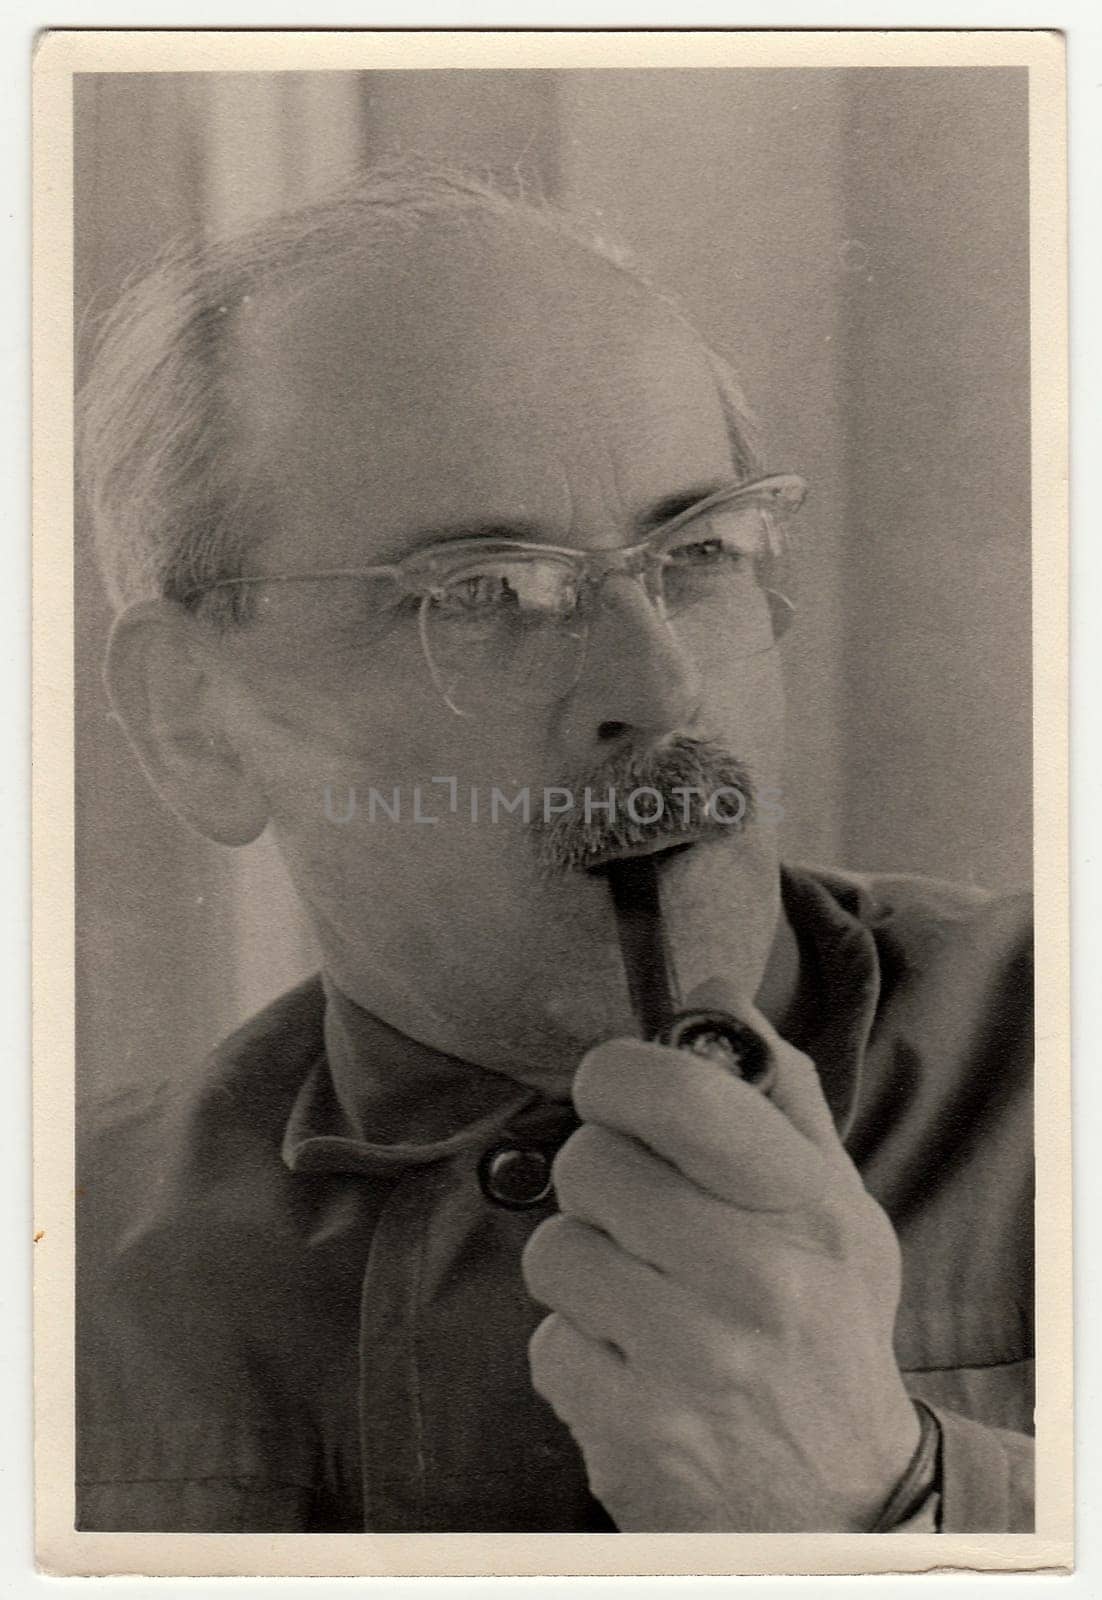 Vintage photo shows man with pipe. by roman_nerud